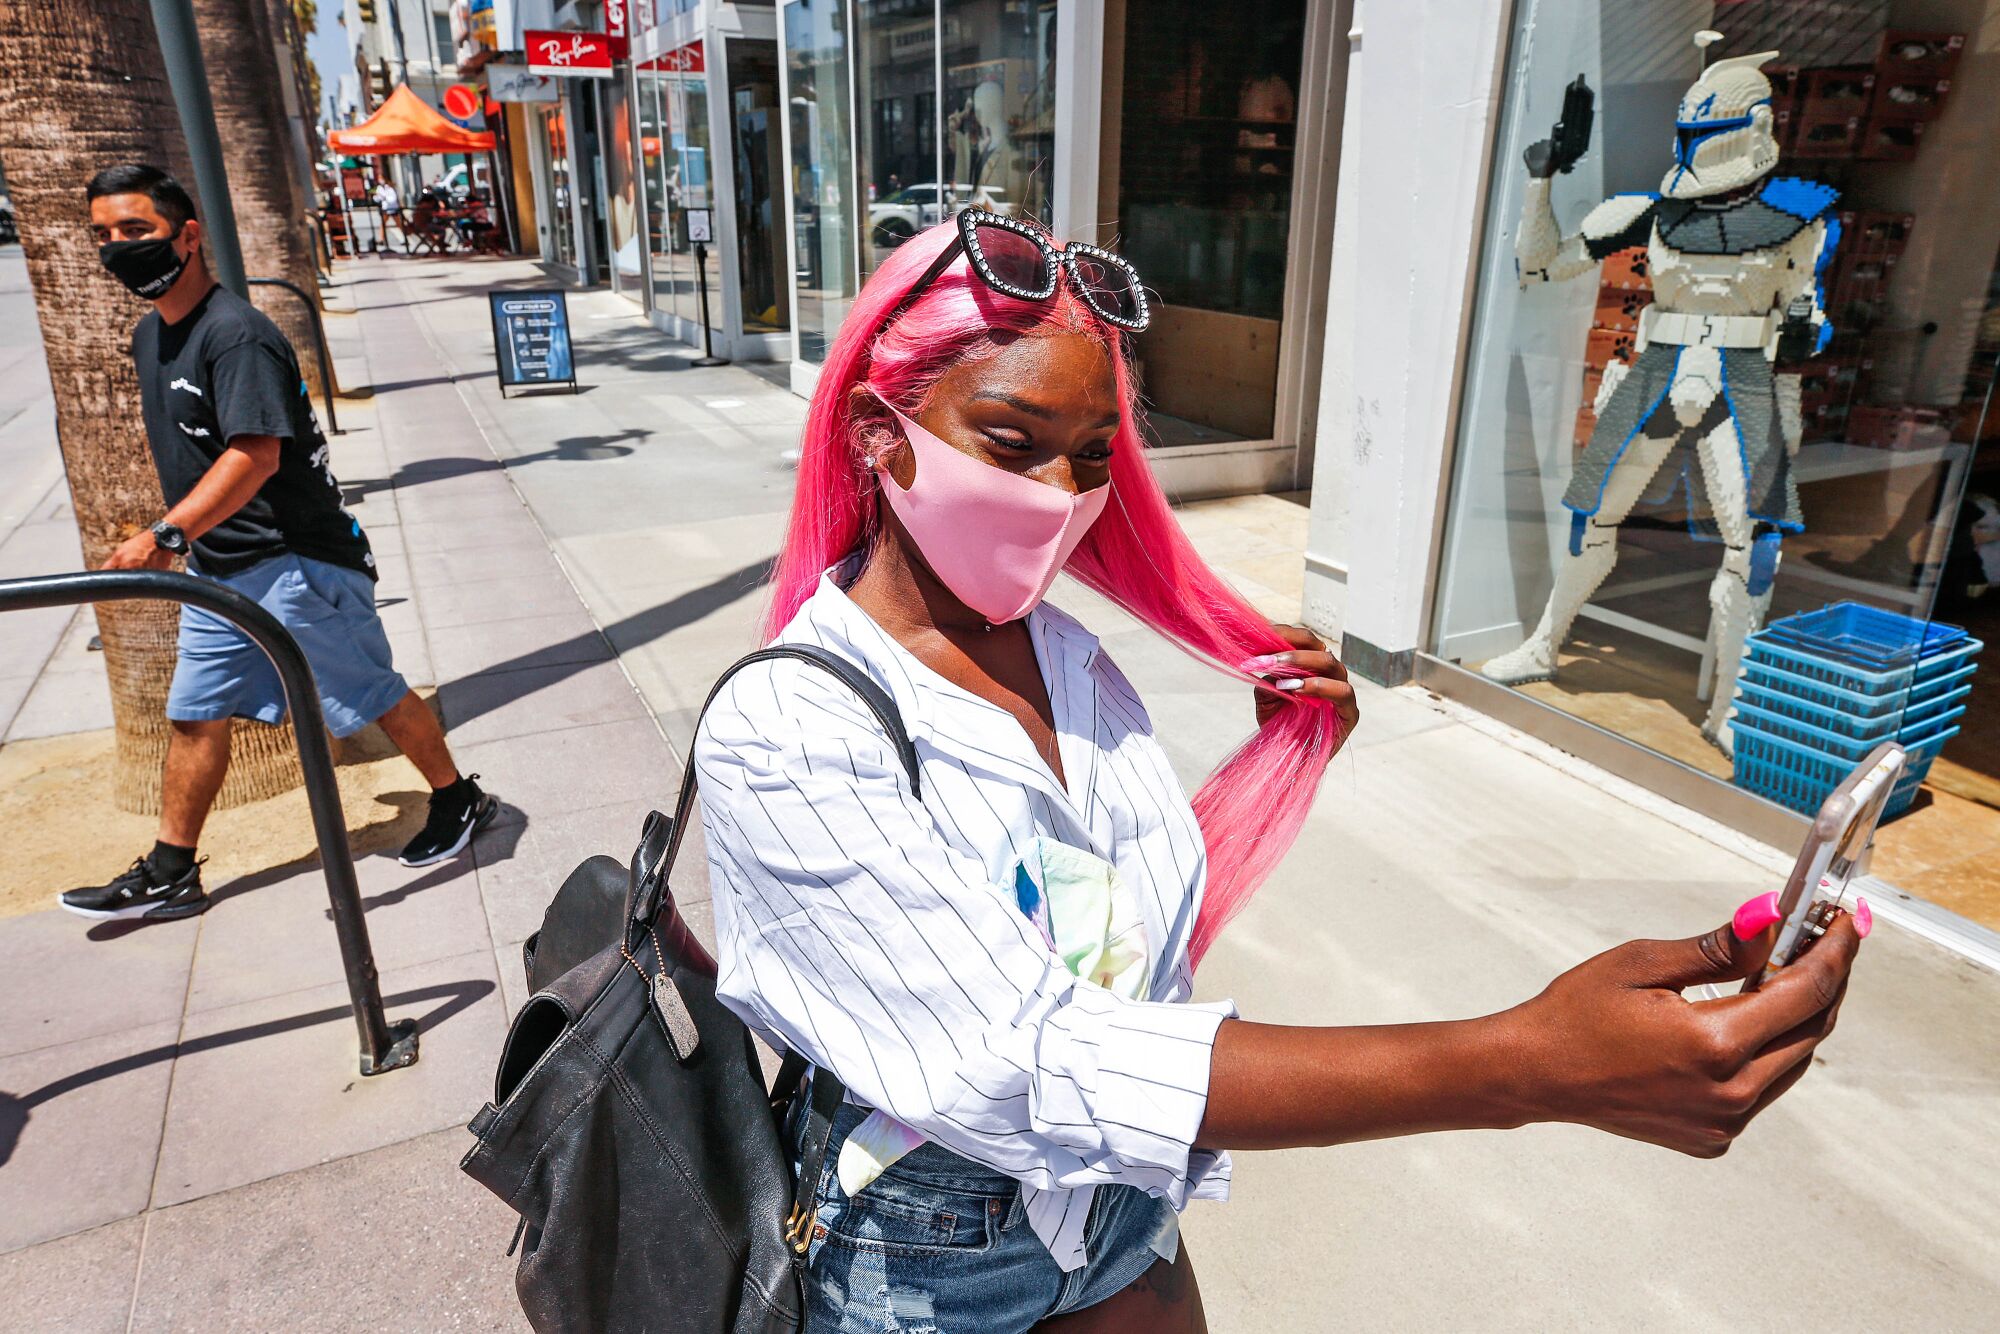 A woman with long pink hair and wearing a mask stands outside shops holding a phone.